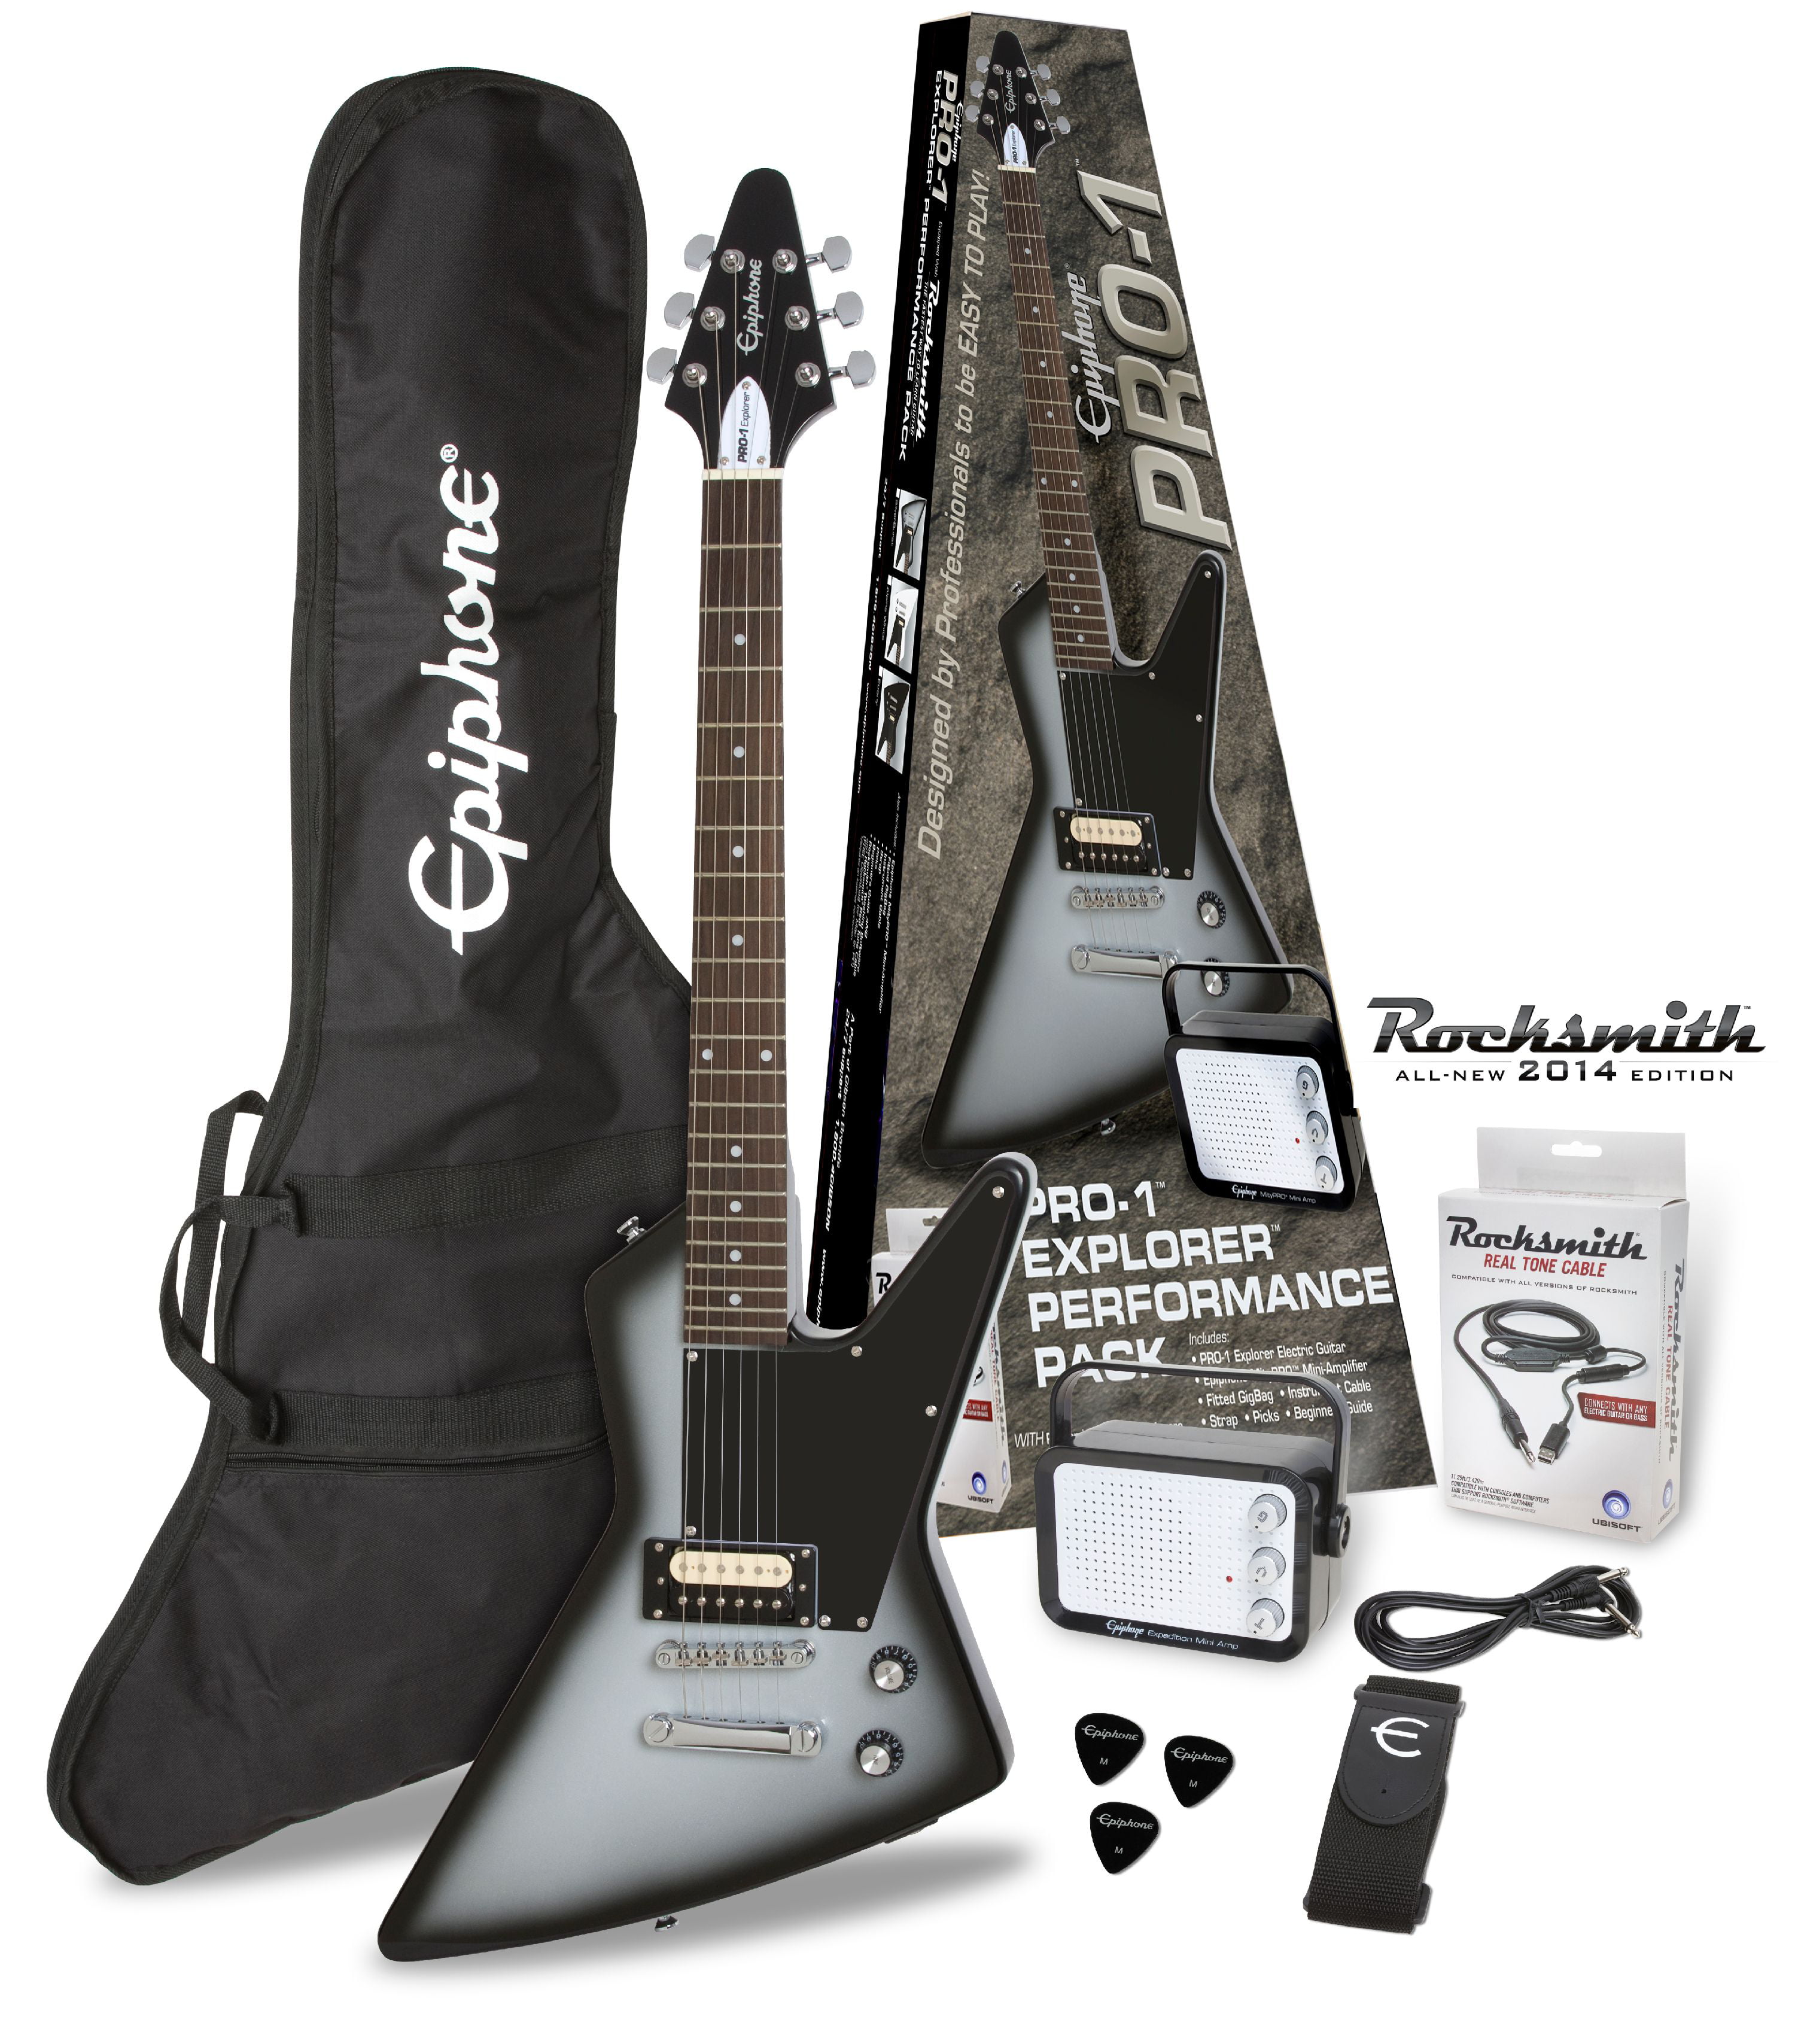 Epiphone PRO-1 Explorer Pack with Amplifier and Accessories